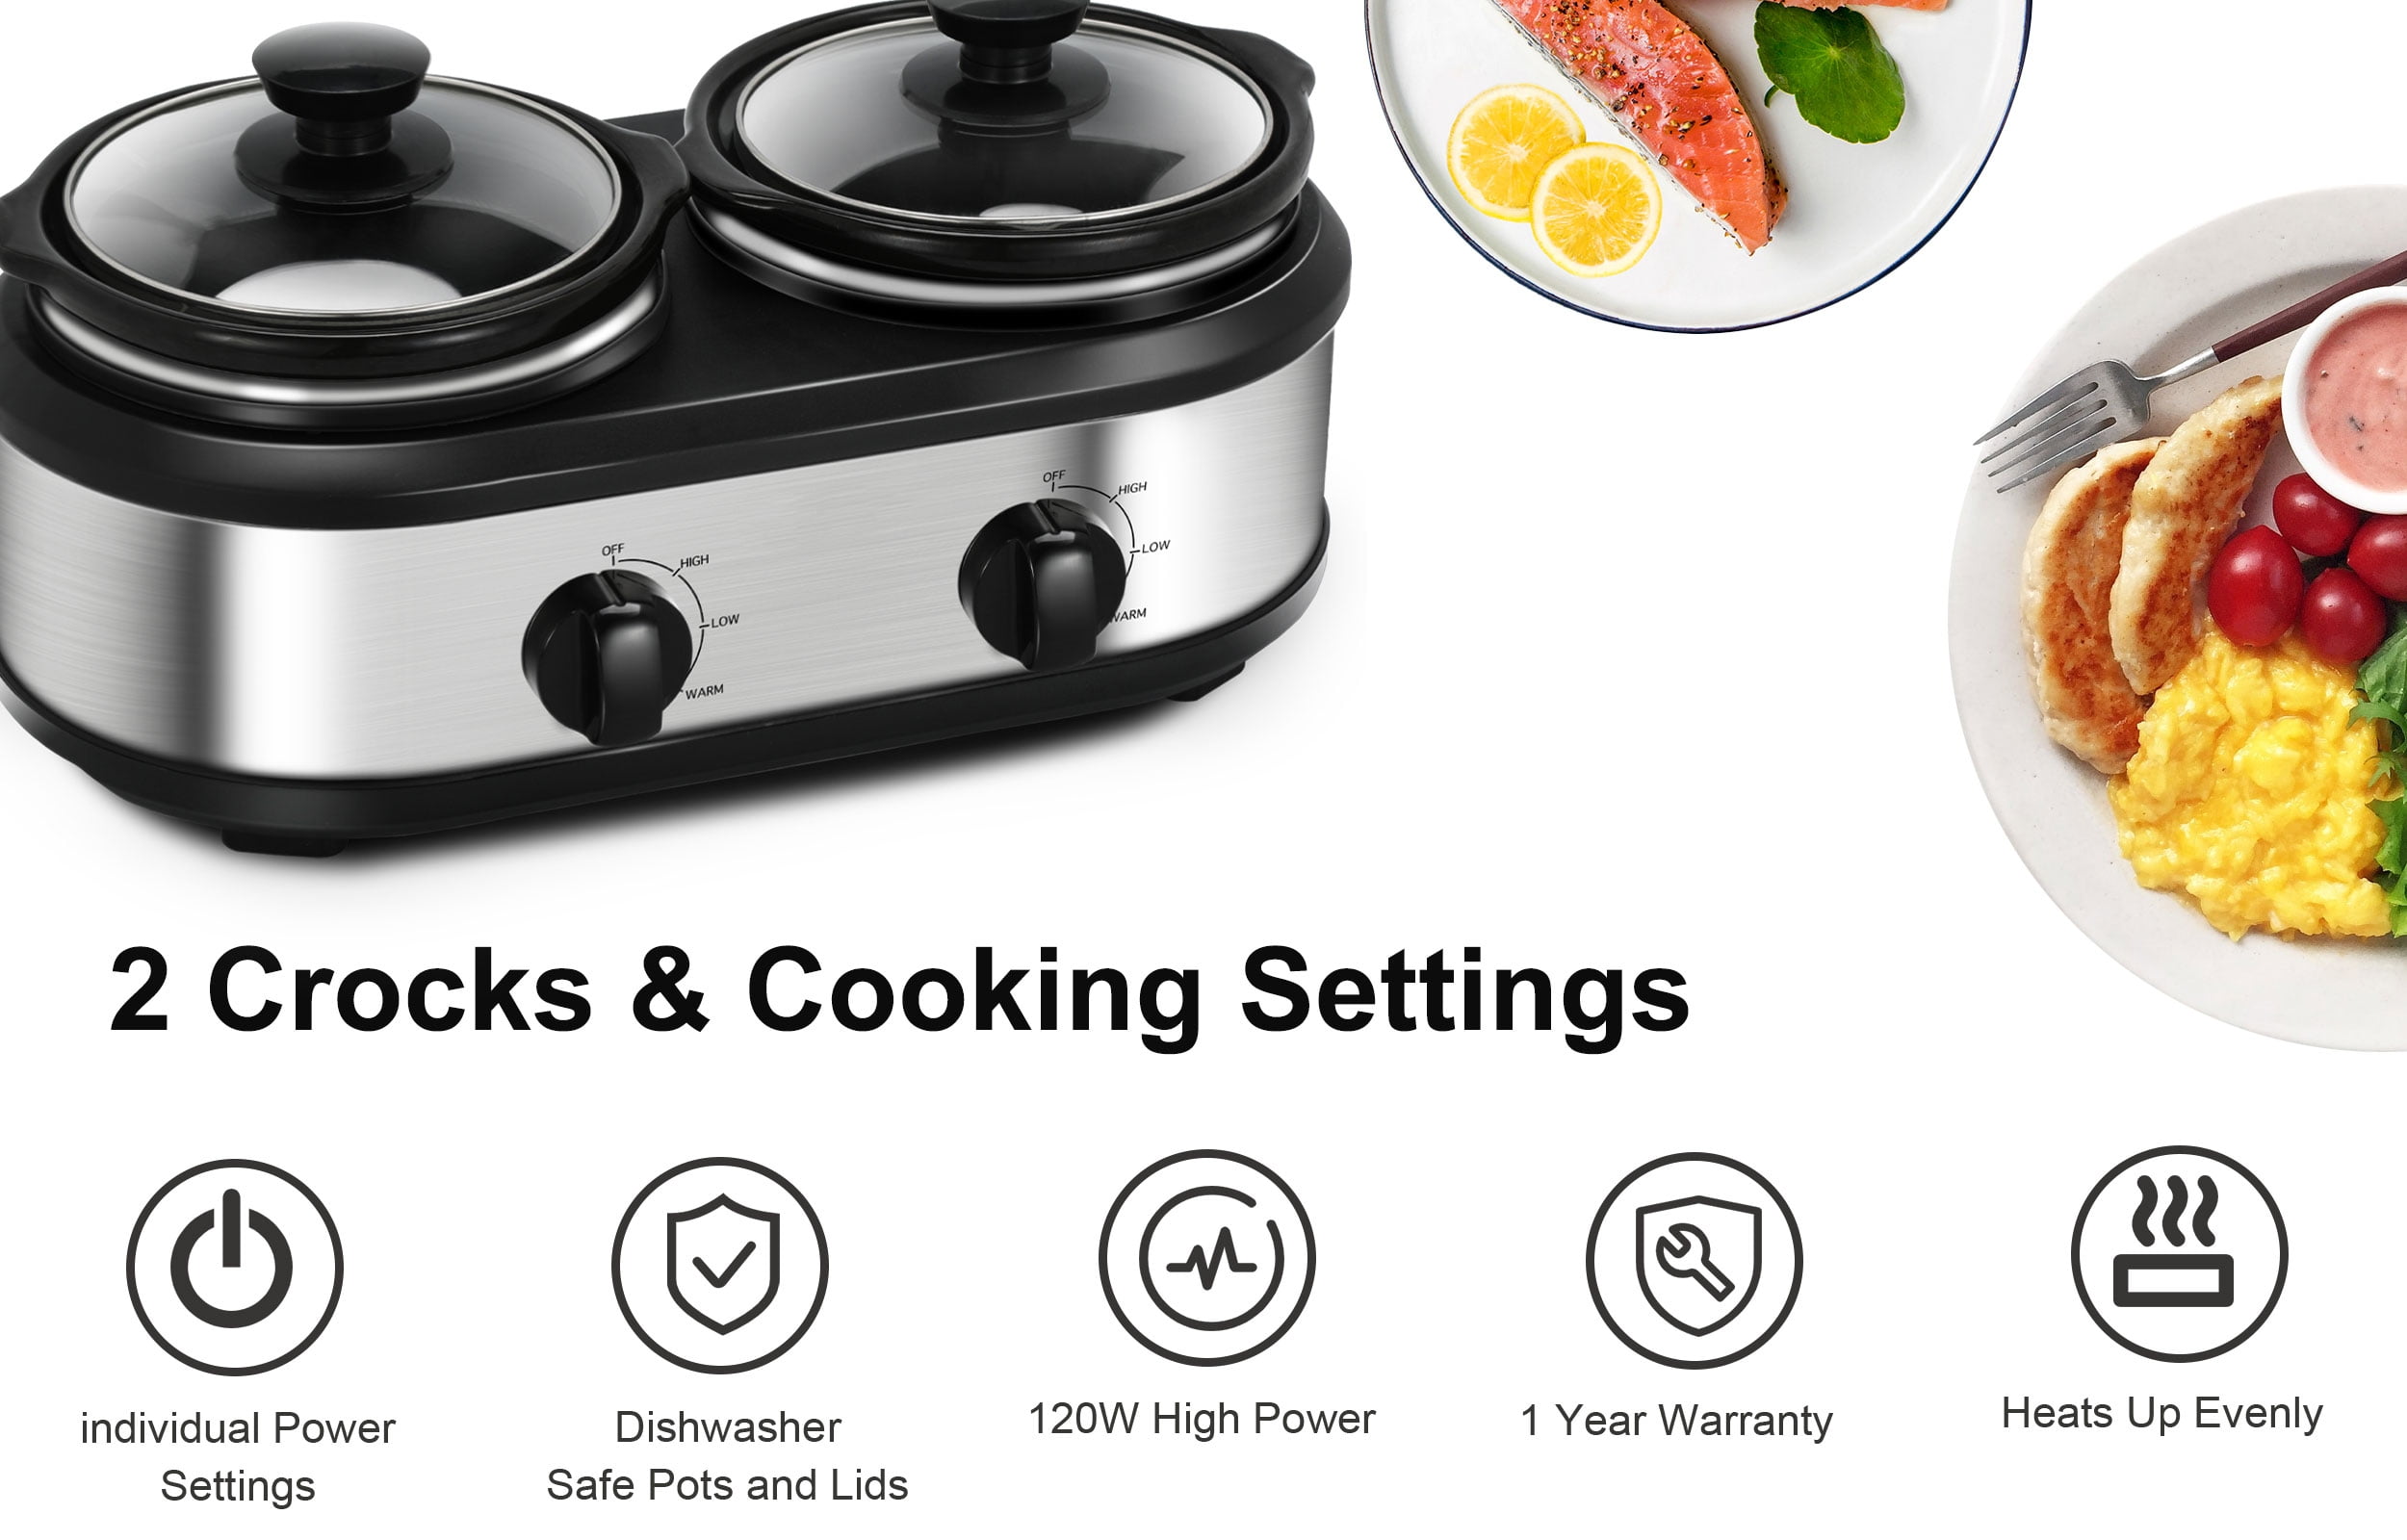 Superjoe Dual Pot Slow Cooker 2x1.25 qt Food Warmer with Adjustable Temp  Slow Cooker Buffet Server Stainless Steel